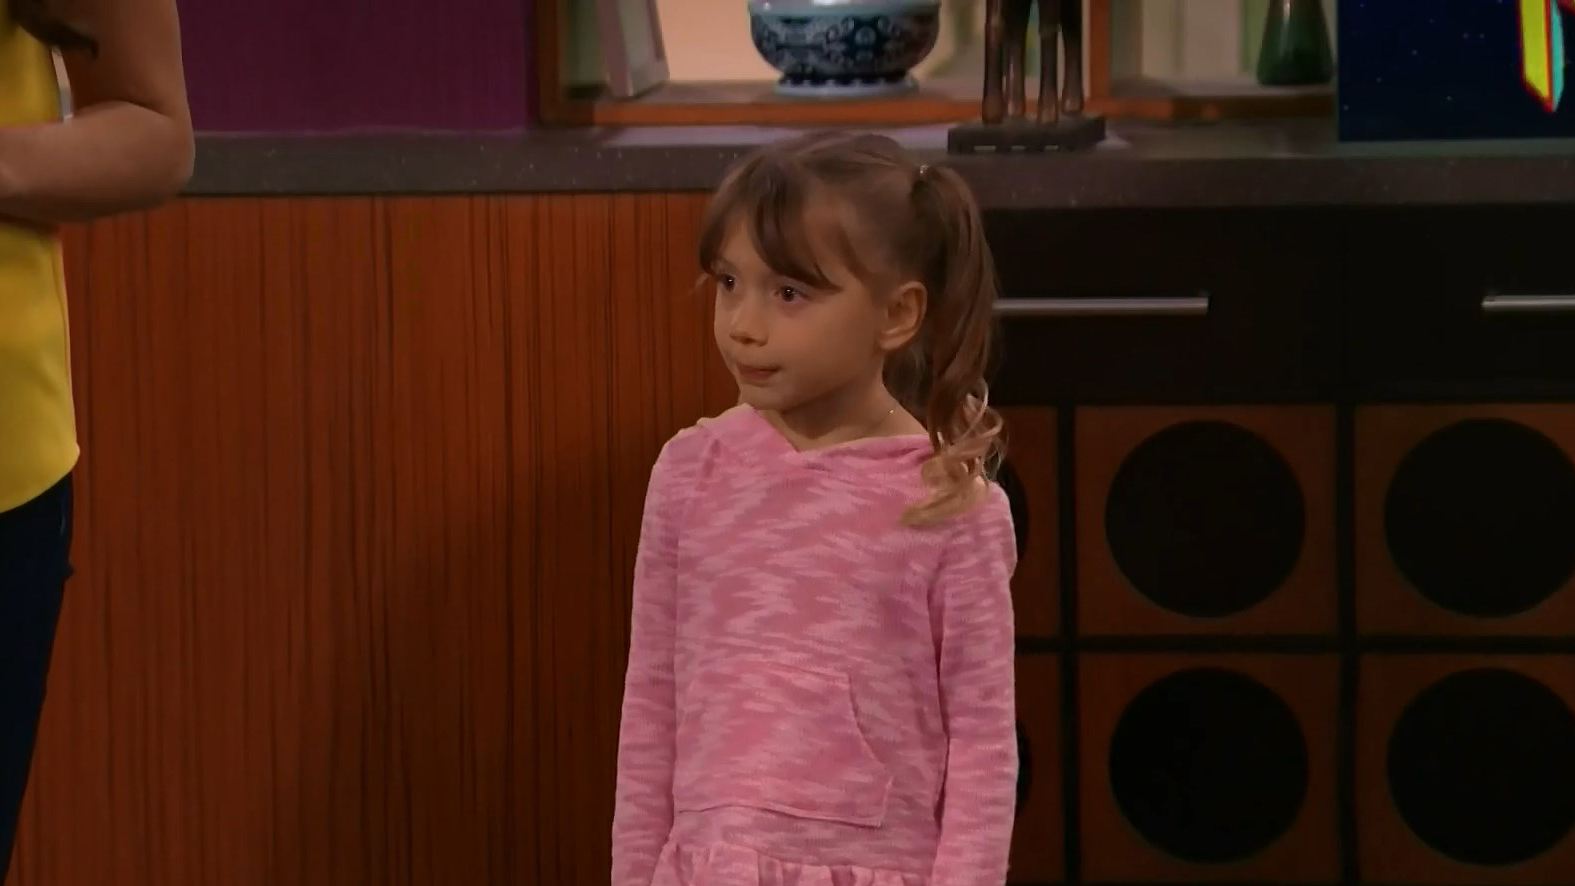 Chloe is the youngest daughter of Hank and Barb Thunderman. 